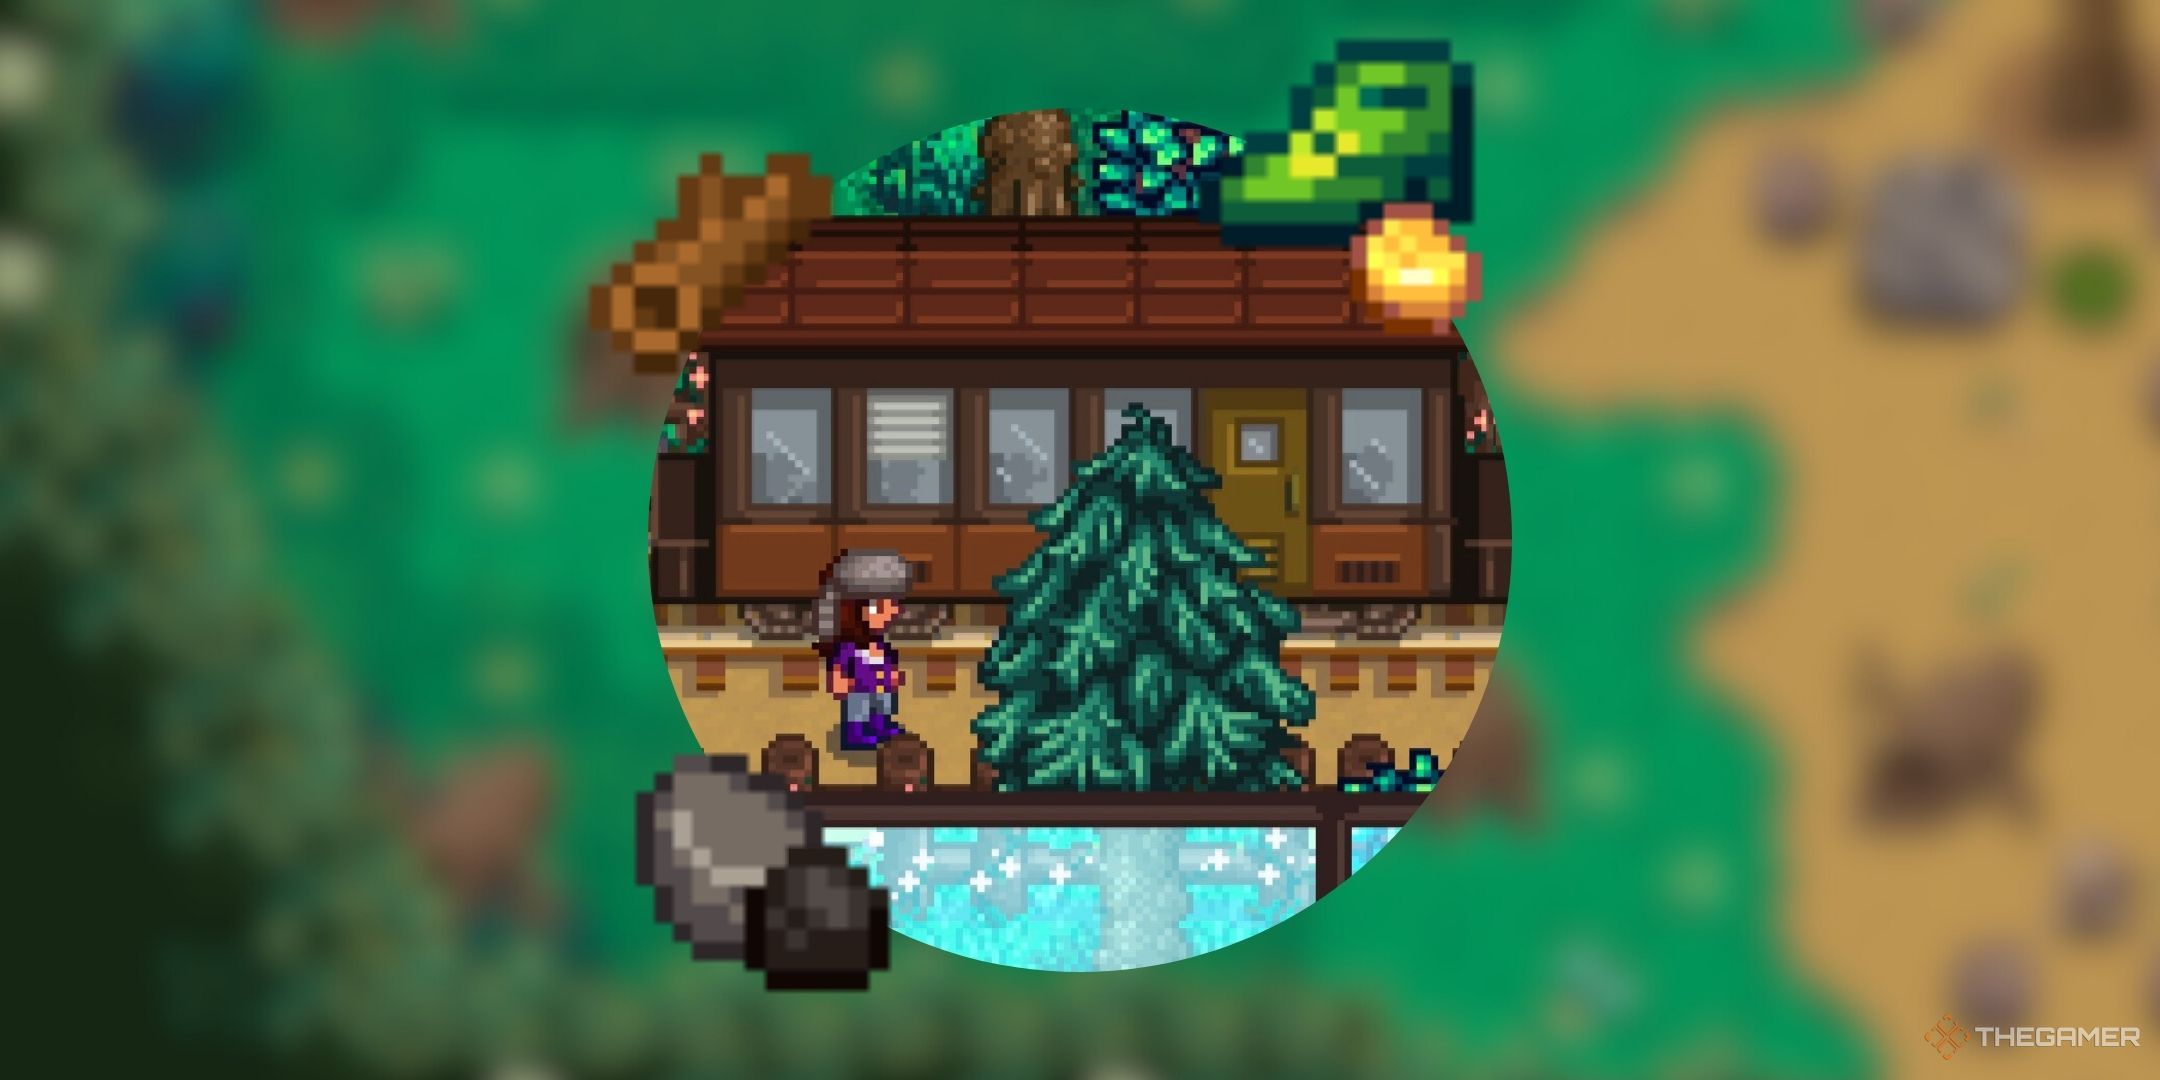 Stardew Valley farmer standing next to train surrounded by leprechaun shoes, gold ore, wood, stone, and coal